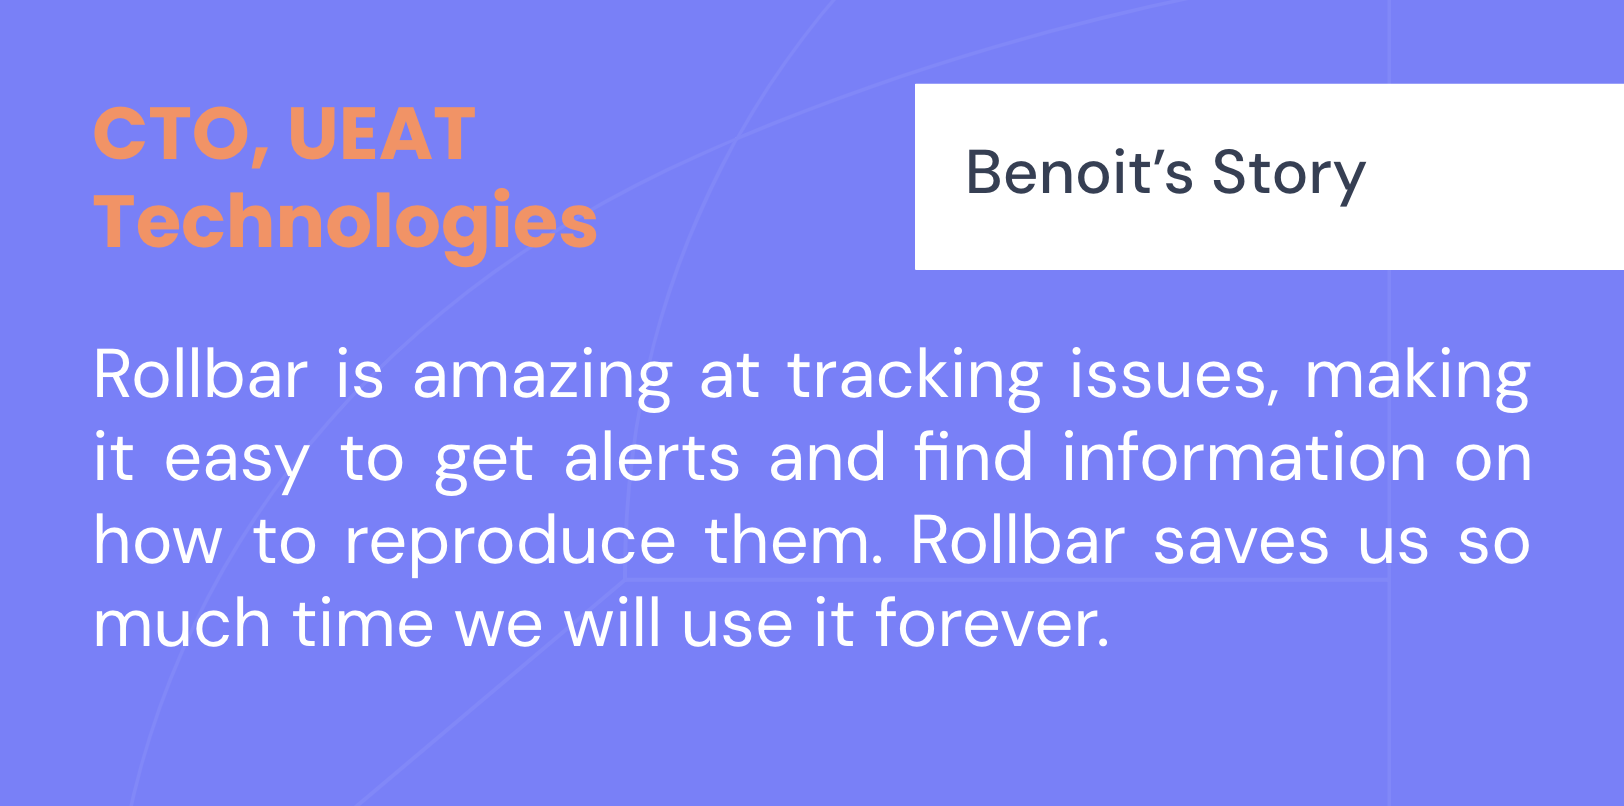 Benoit’s story with Rollbar